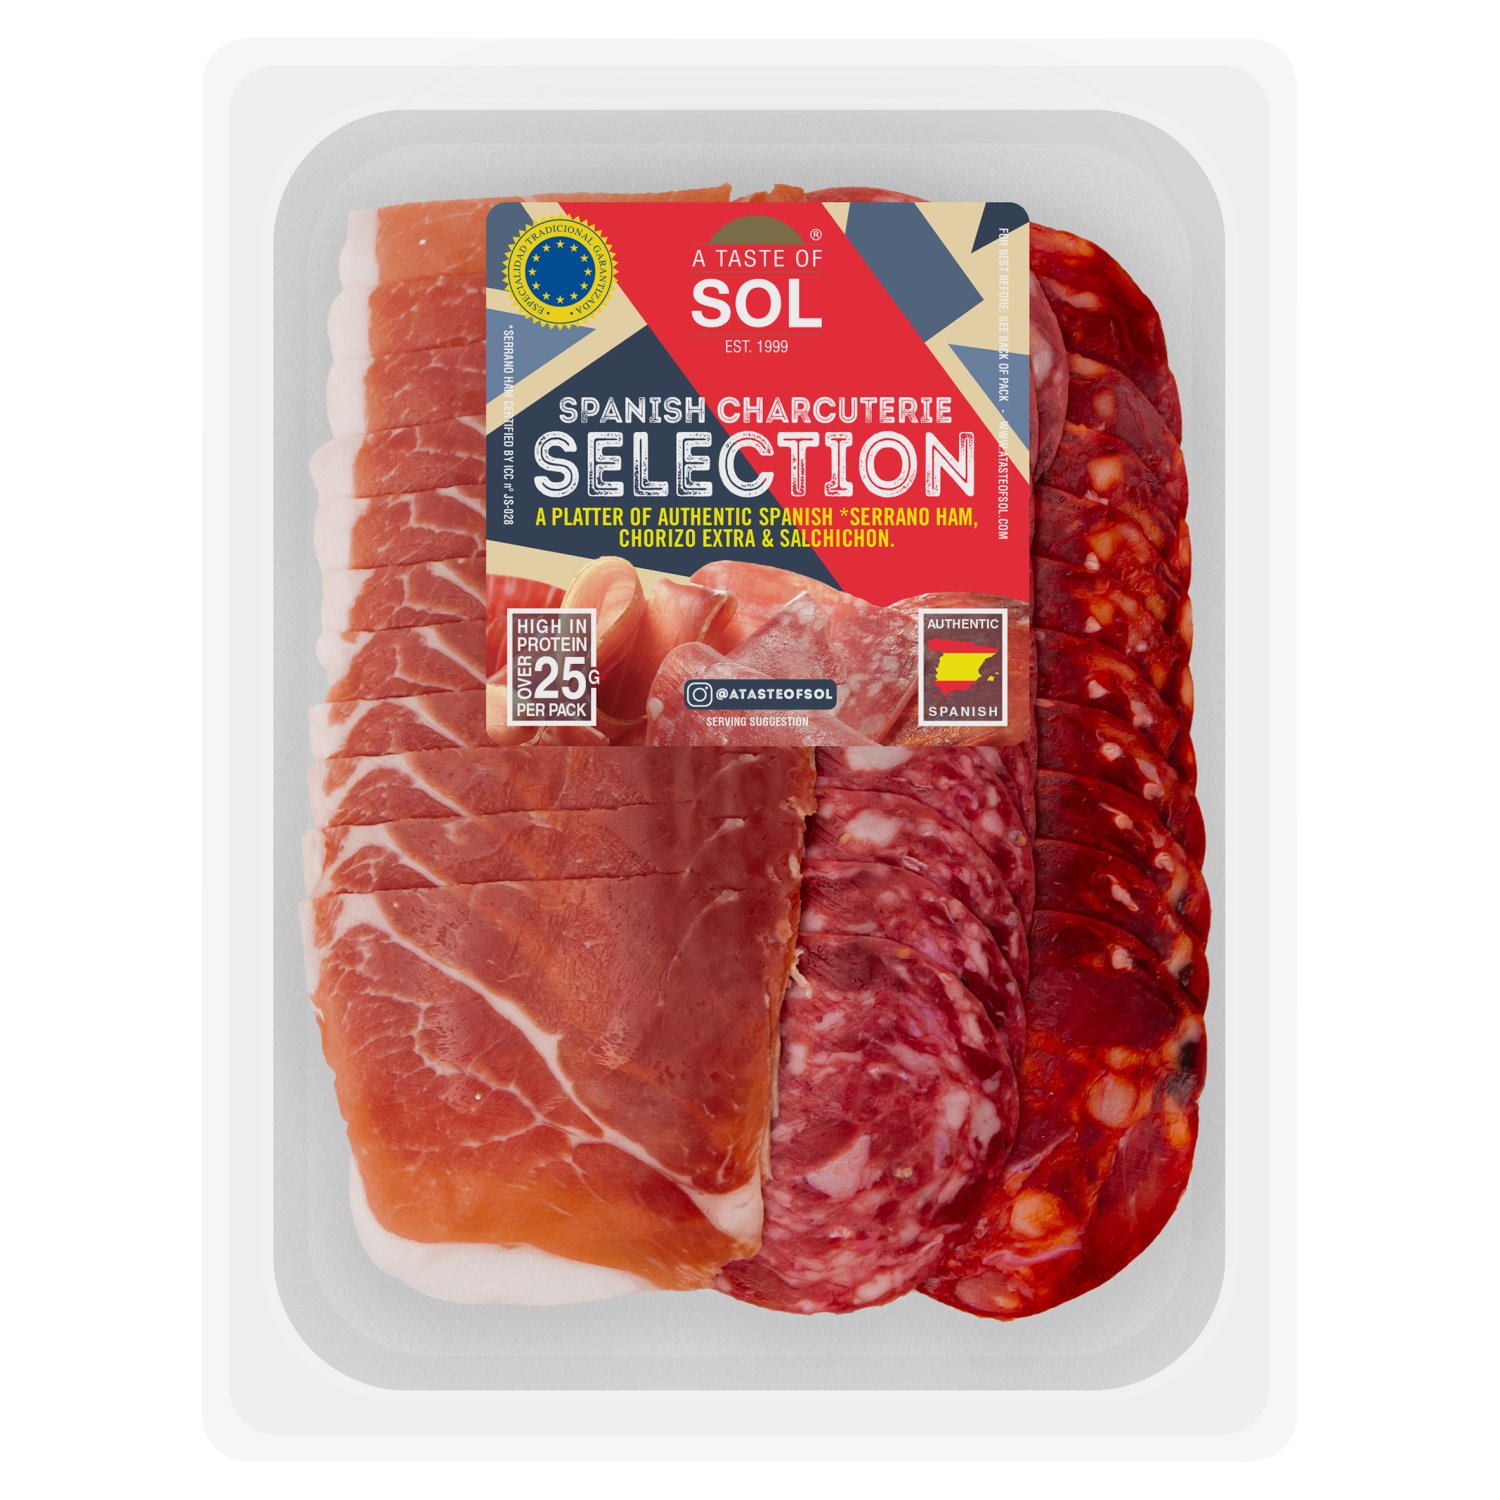 Sol Spanish Charcuterie Selection (150 g)